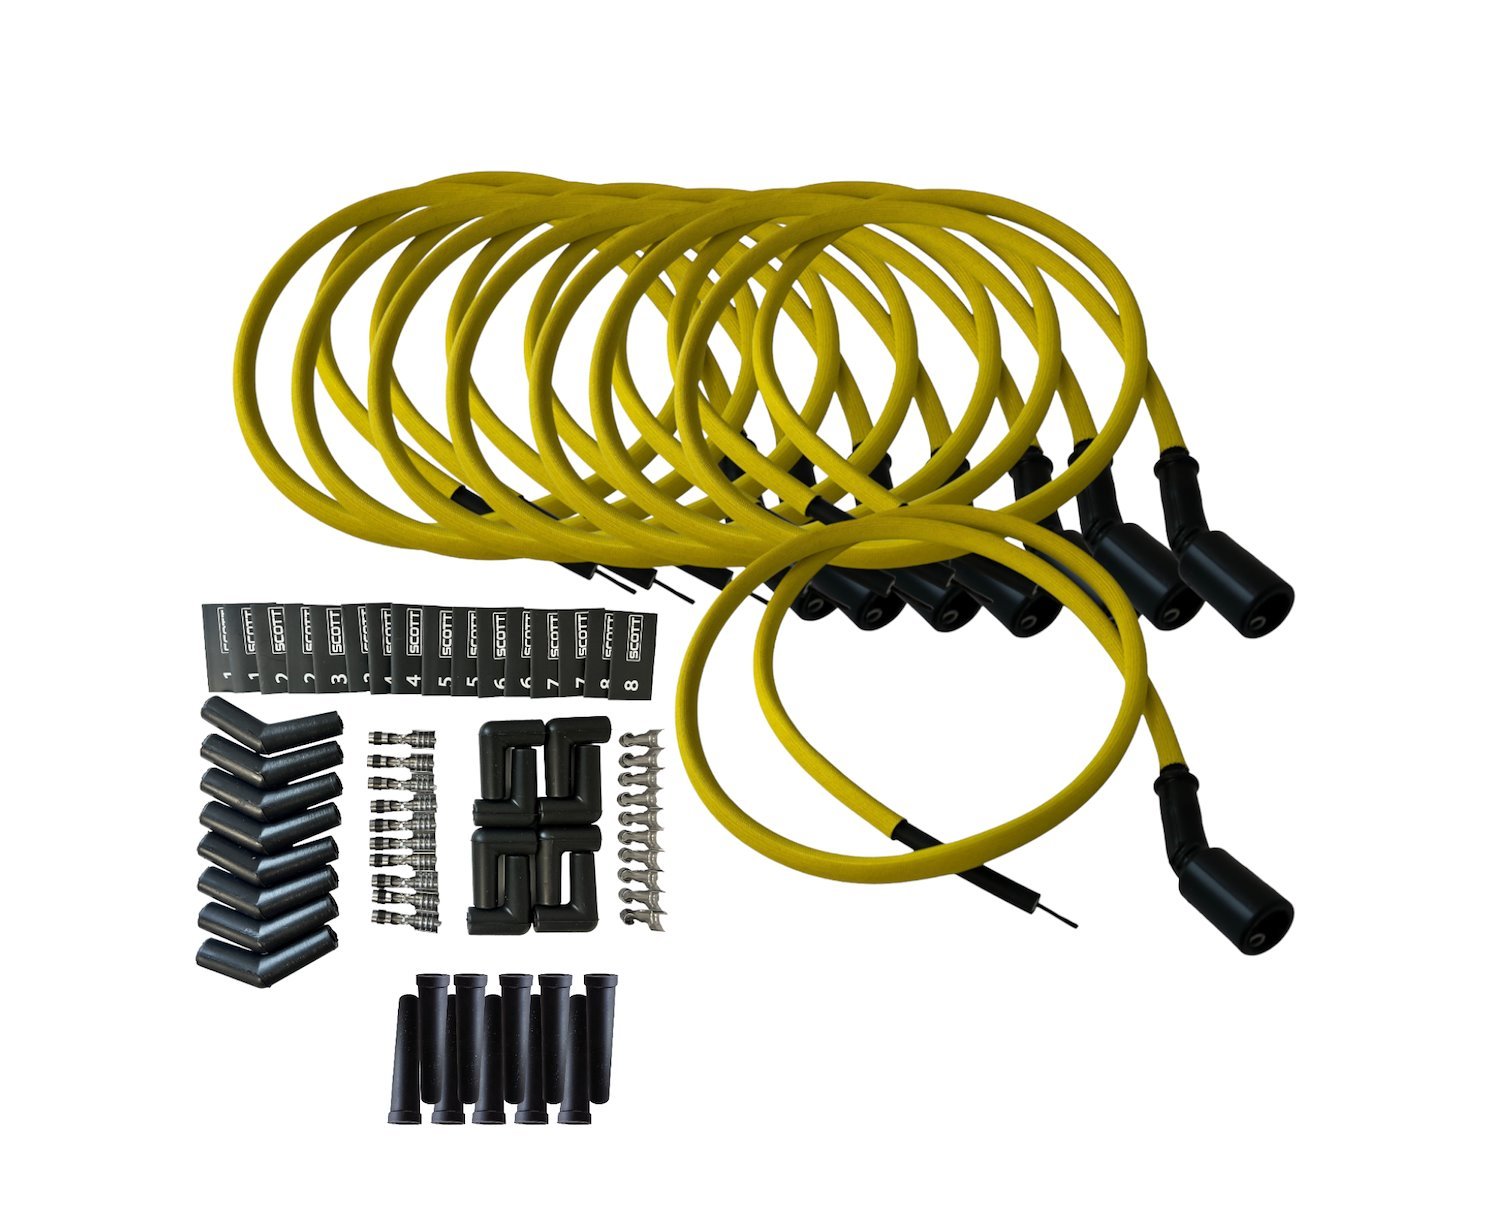 SPW-PS-LSRELO-5 DIY High-Performance Fiberglass-Oversleeved Spark Plug Wire Set for DIY Kits, GM LS [Yellow]